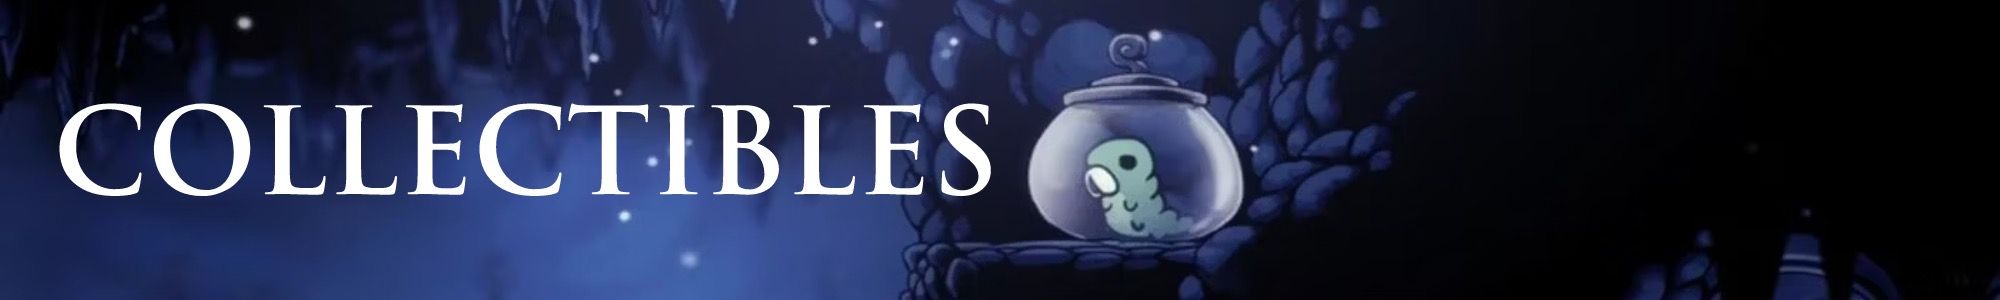 Hollow Knight hub - Collectibles